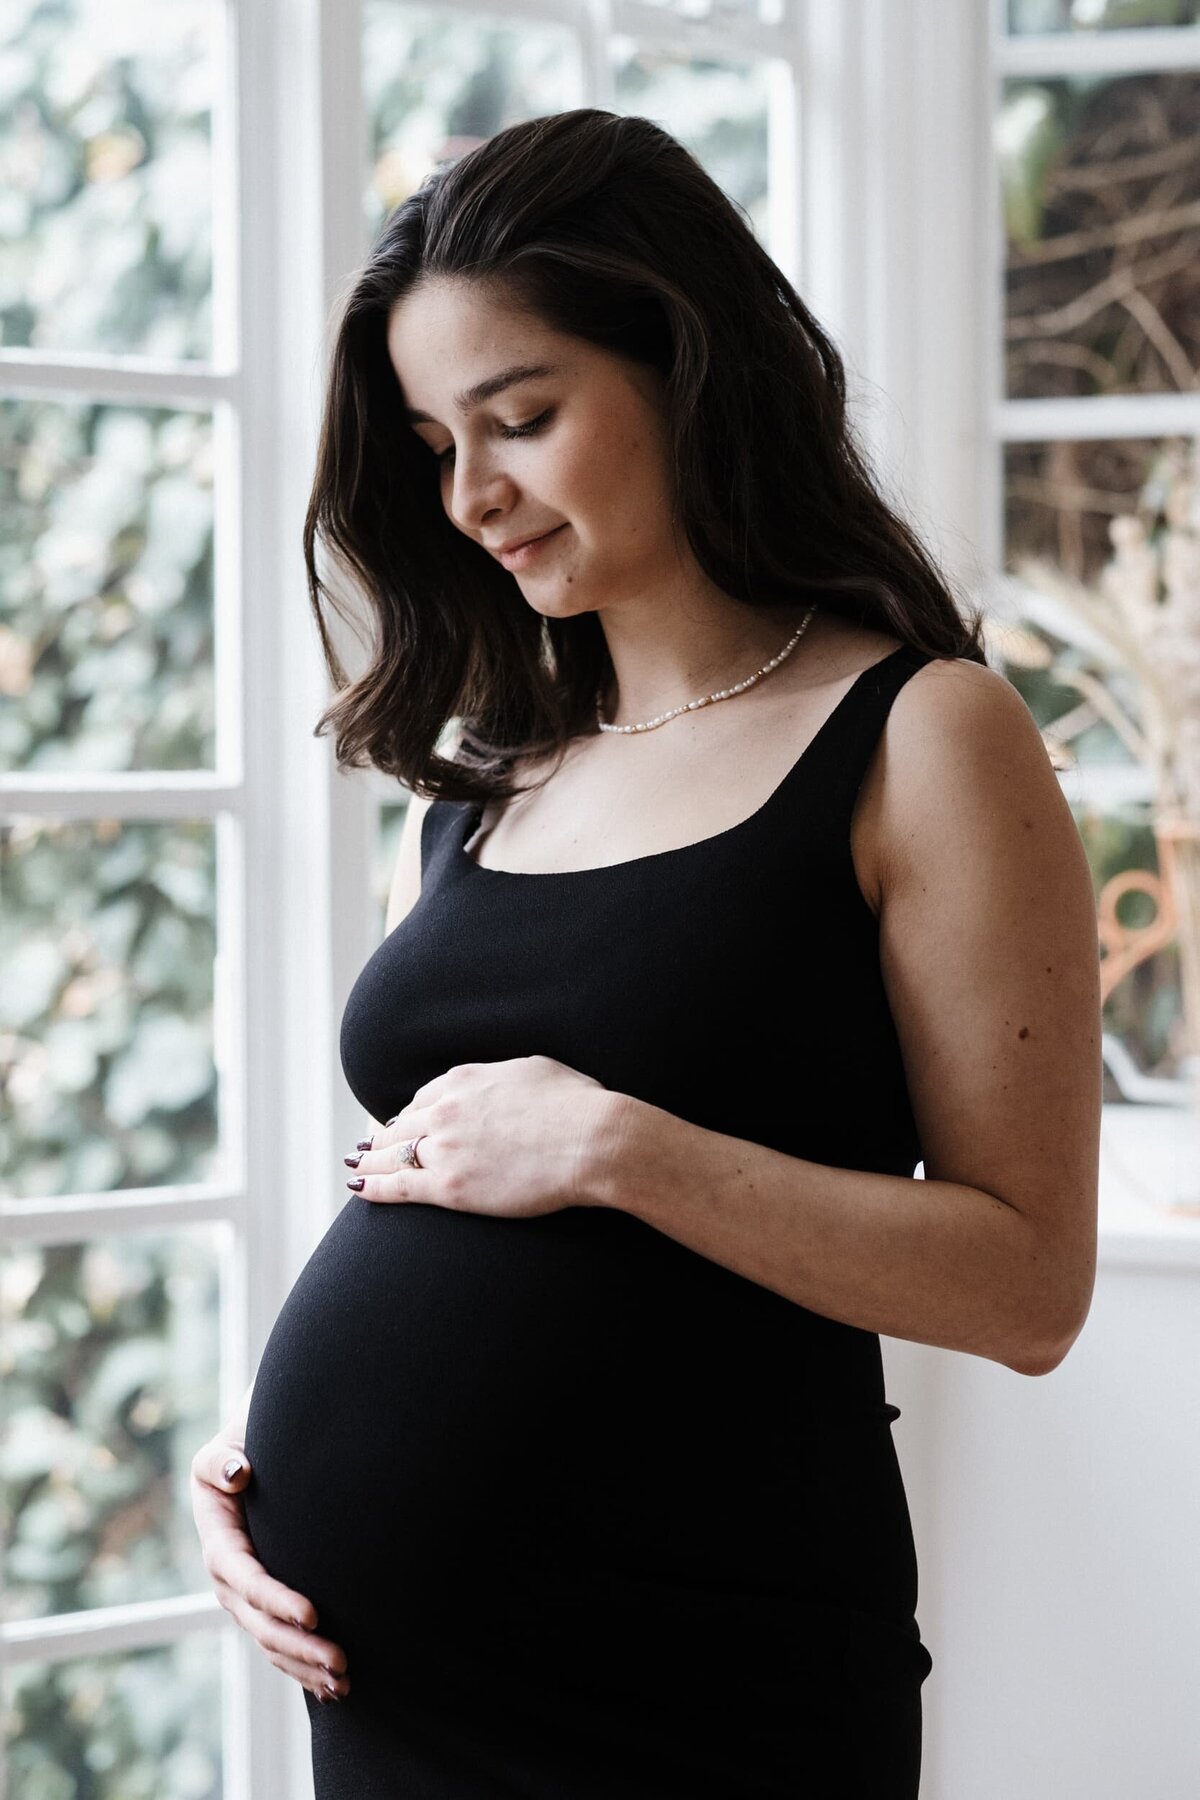 Woman in black dress with pearl necklace holds her pregnant belly